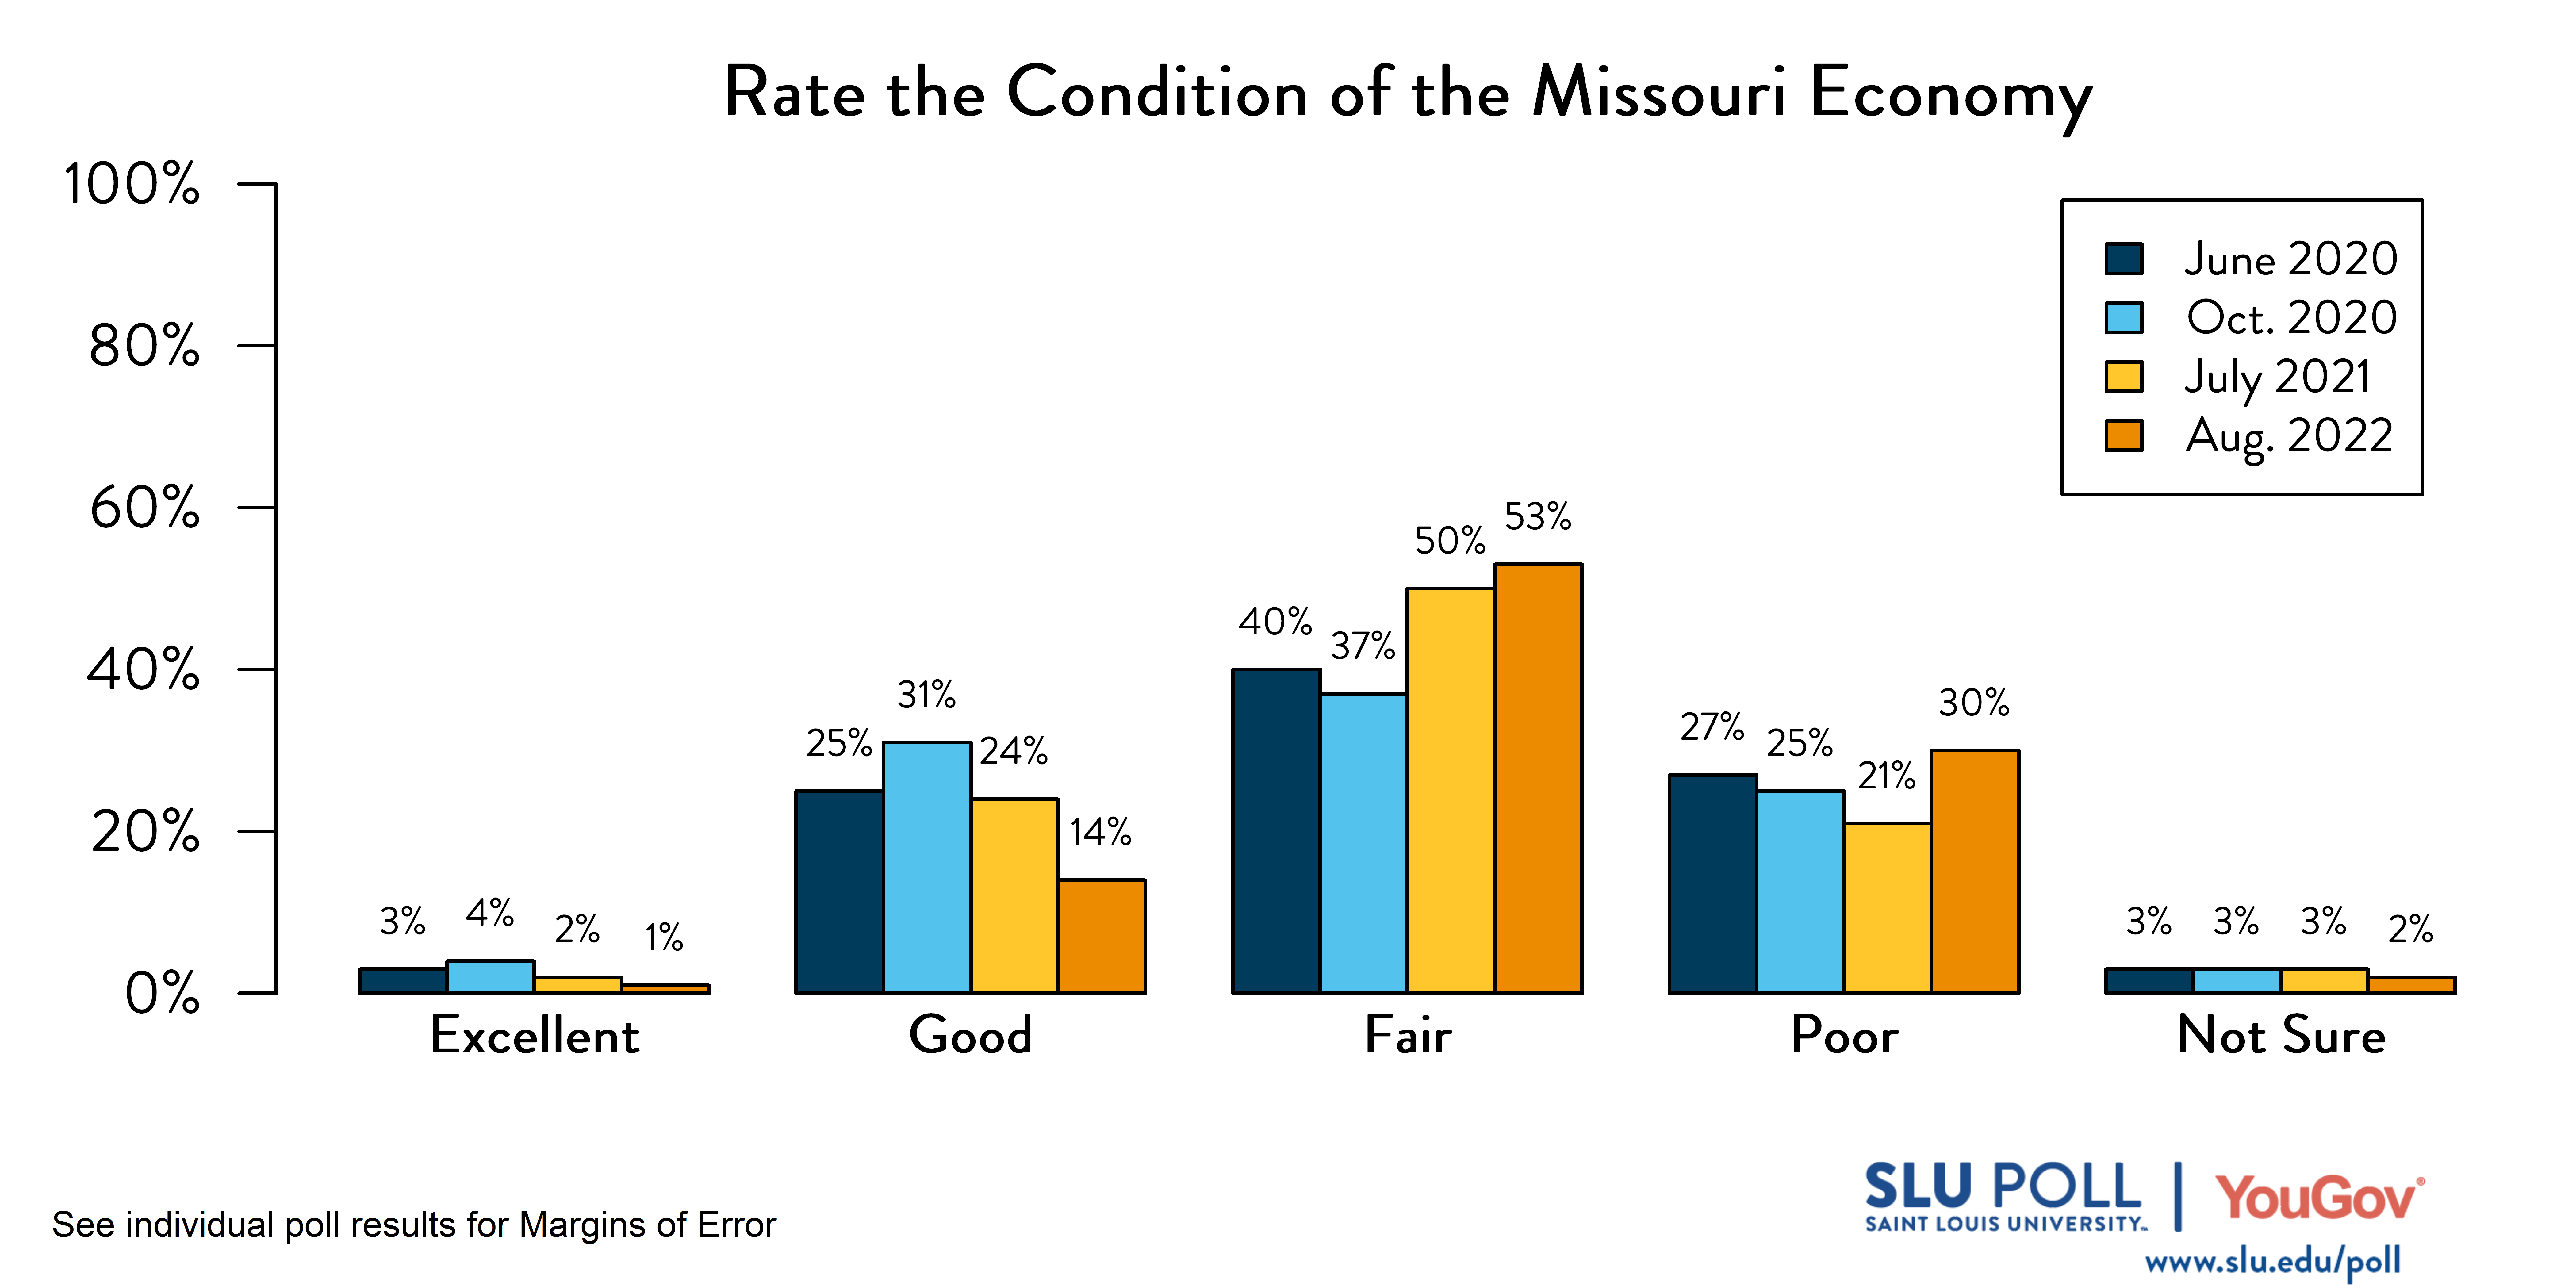 Likely voters' responses to 'How would you rate the condition of the following: The Economy in the State of Missouri?'. June 2020 Voter Responses 3% Excellent, 25% Good, 40% Fair, 27% Poor, and 3% Not Sure. October 2020 Voter Responses: 4% Excellent, 31% Good, 37% Fair, 25% Poor, and 3% Not sure. July 2021 Voter Responses: 2% Excellent, 24% Good, 50% Fair, 21% Poor, and 3% Not sure. August 2021 Voter Responses: 1% Excellent, 14% Good, 53% Fair, 30% Poor, and 2% Not sure.